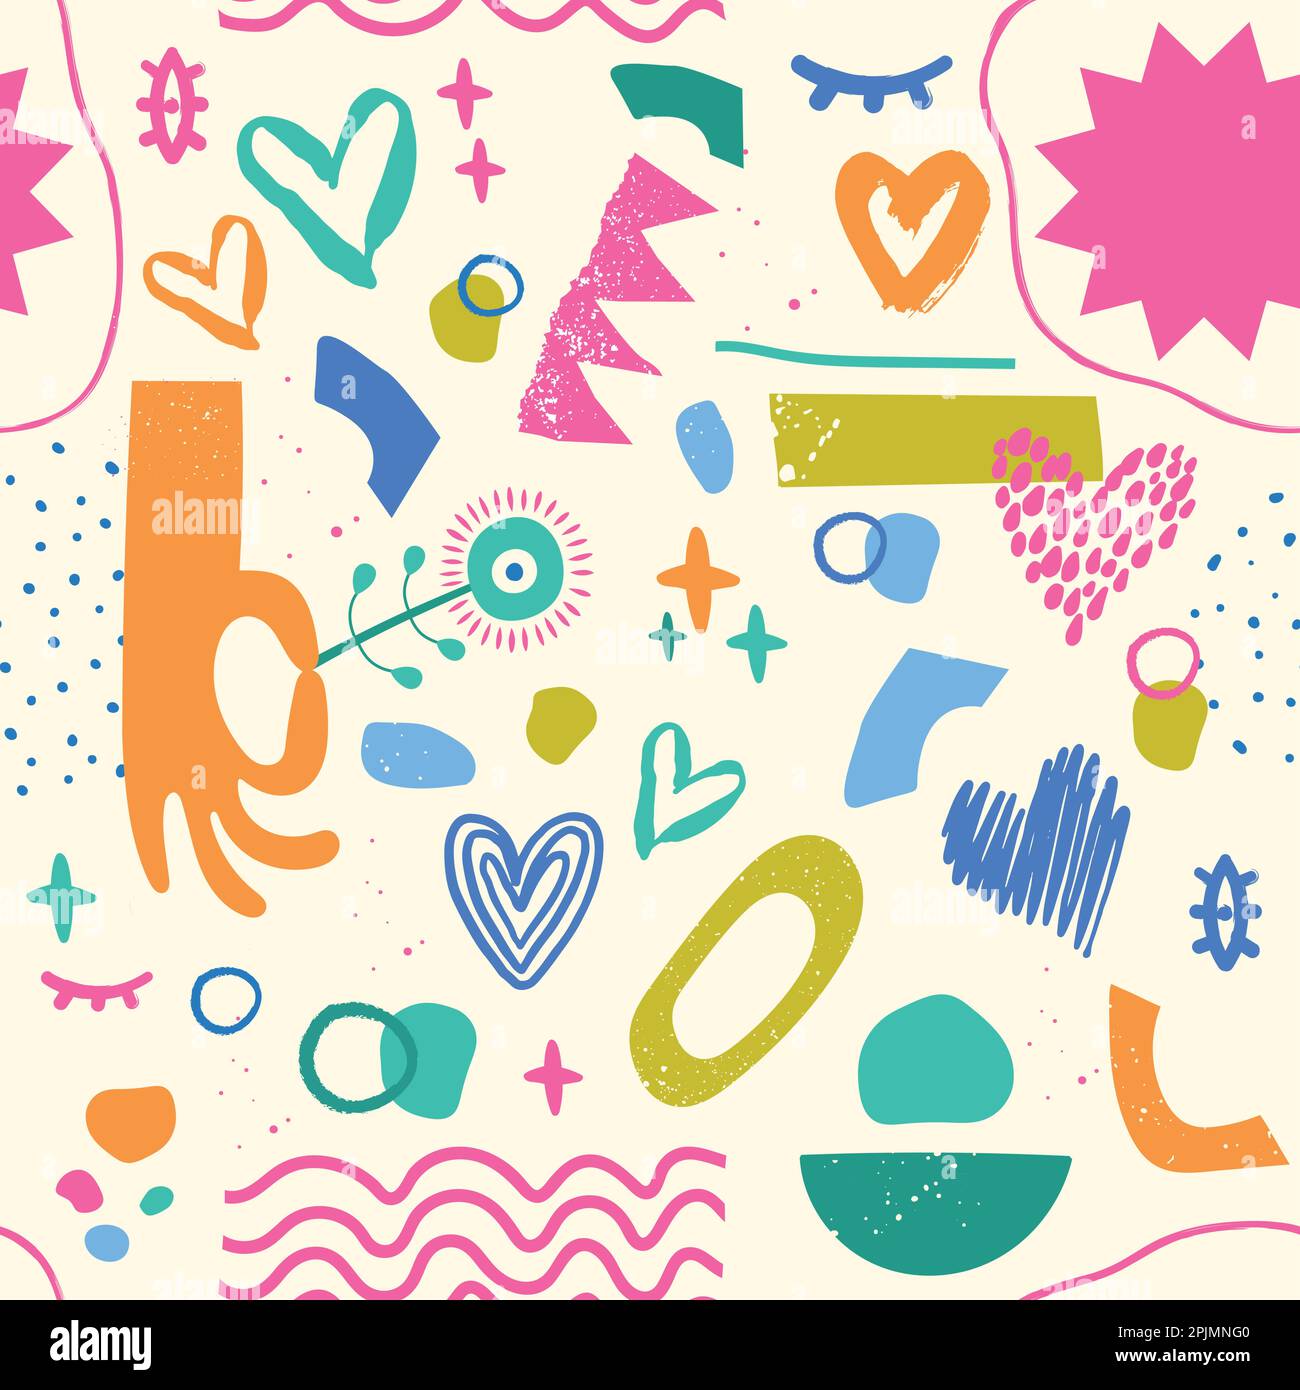 Fun colorful doodle seamless pattern. Creative minimalist style art background for children or trendy design with basic shapes. Simple childish scribb Stock Vector